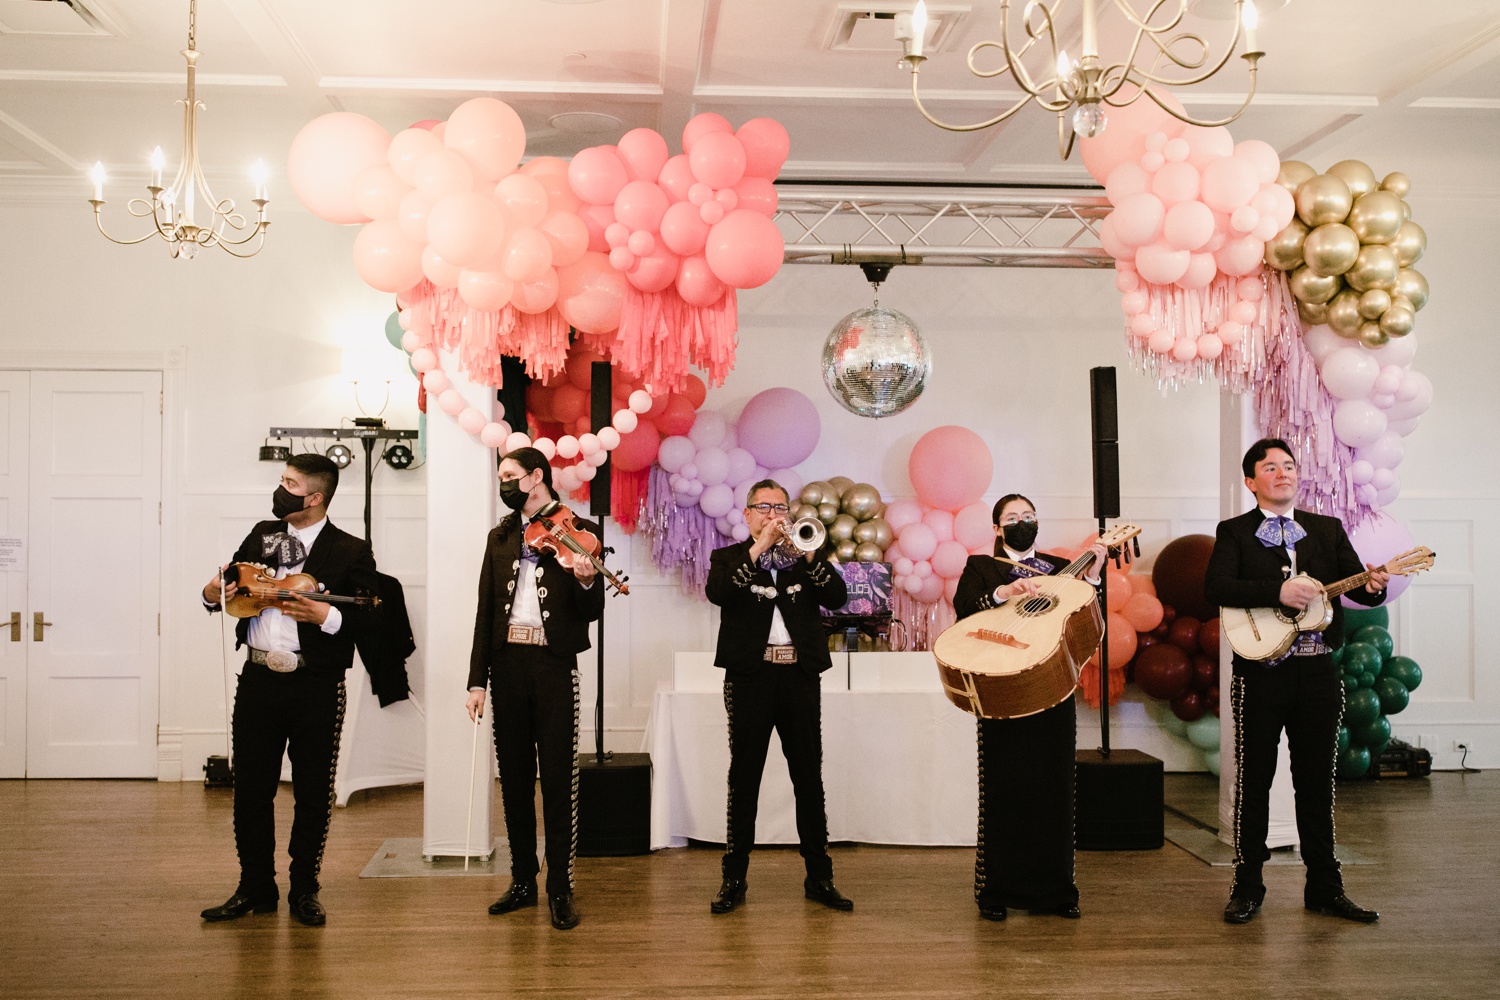 Dance party reception featuring brightly colored balloons, a disco ball, and a mariachi band